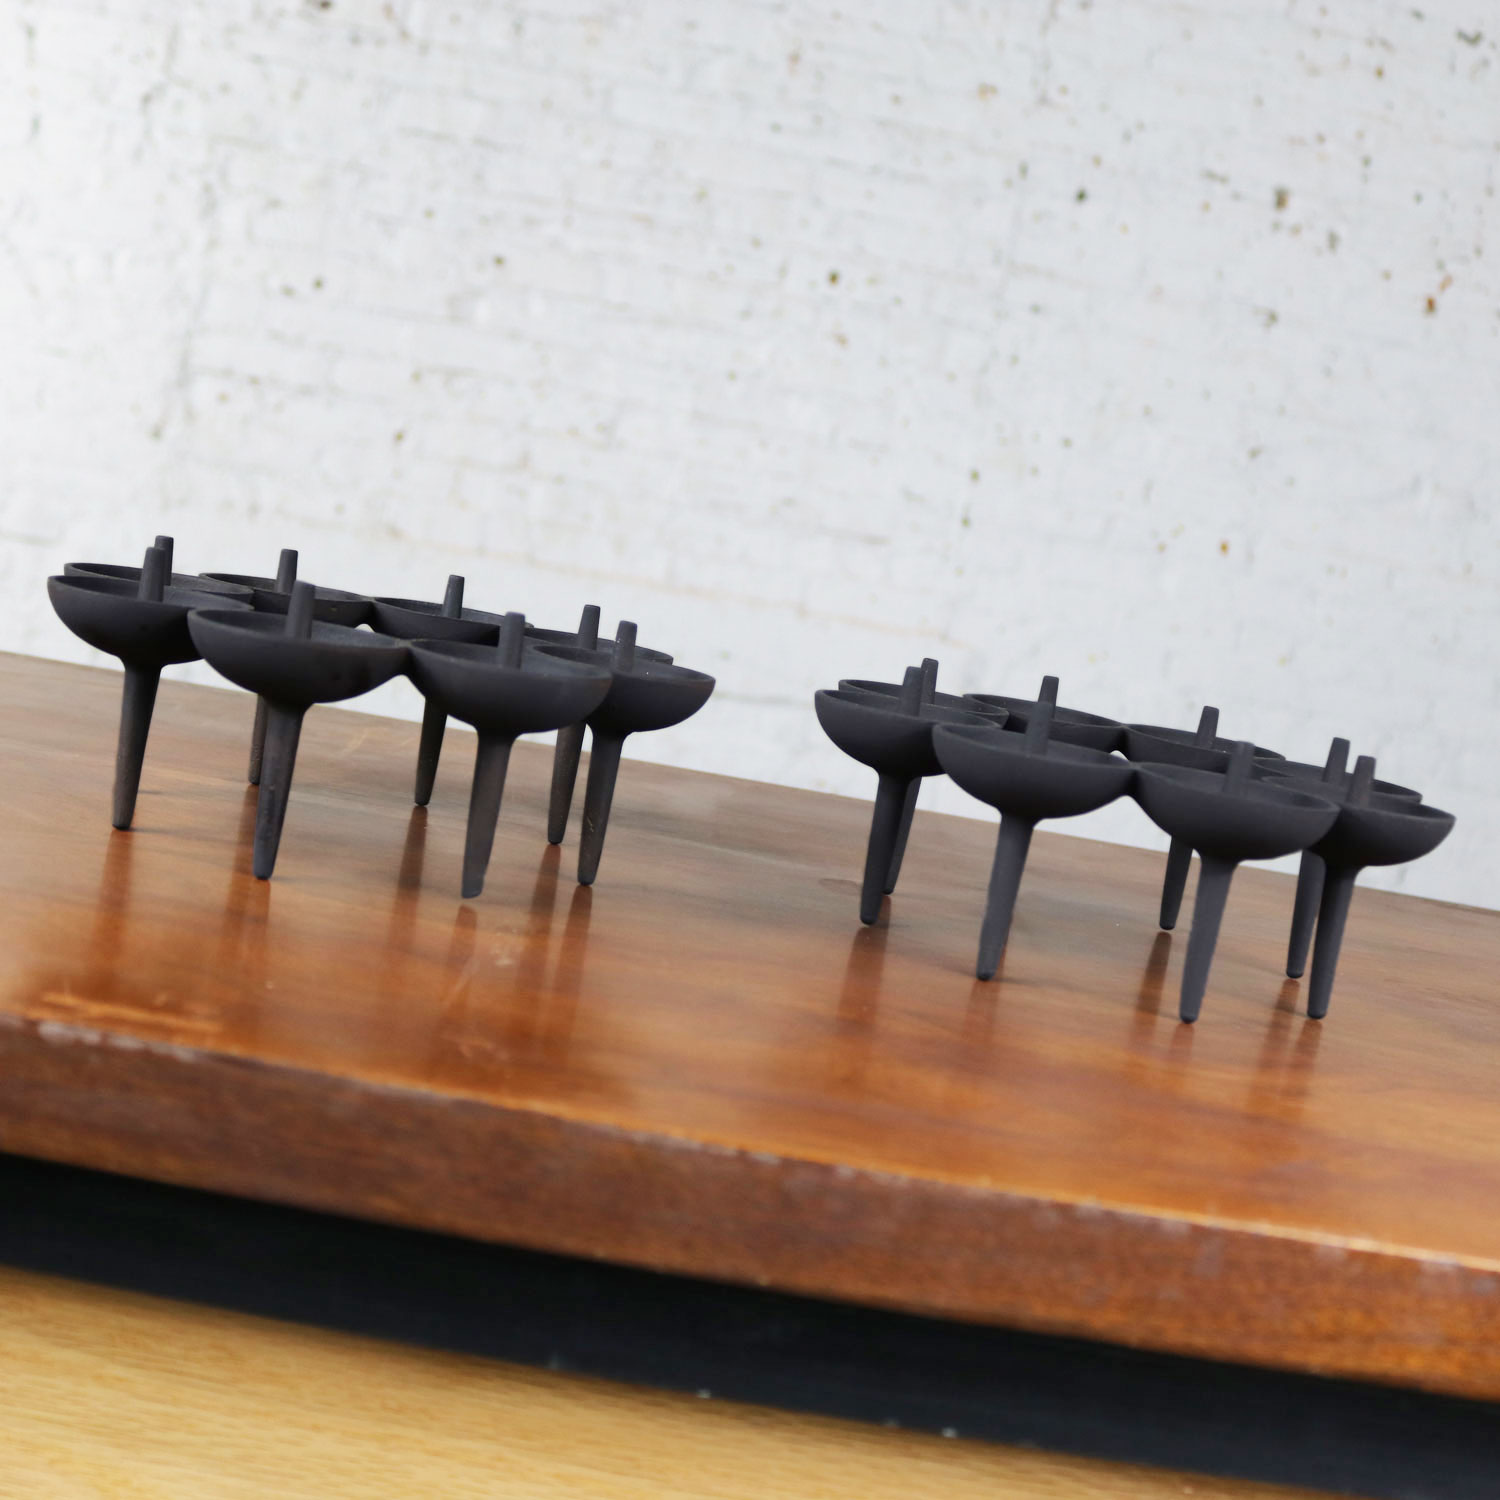 Dansk Black Iron Design with Light Series Candle Holders by Borje Rajalin